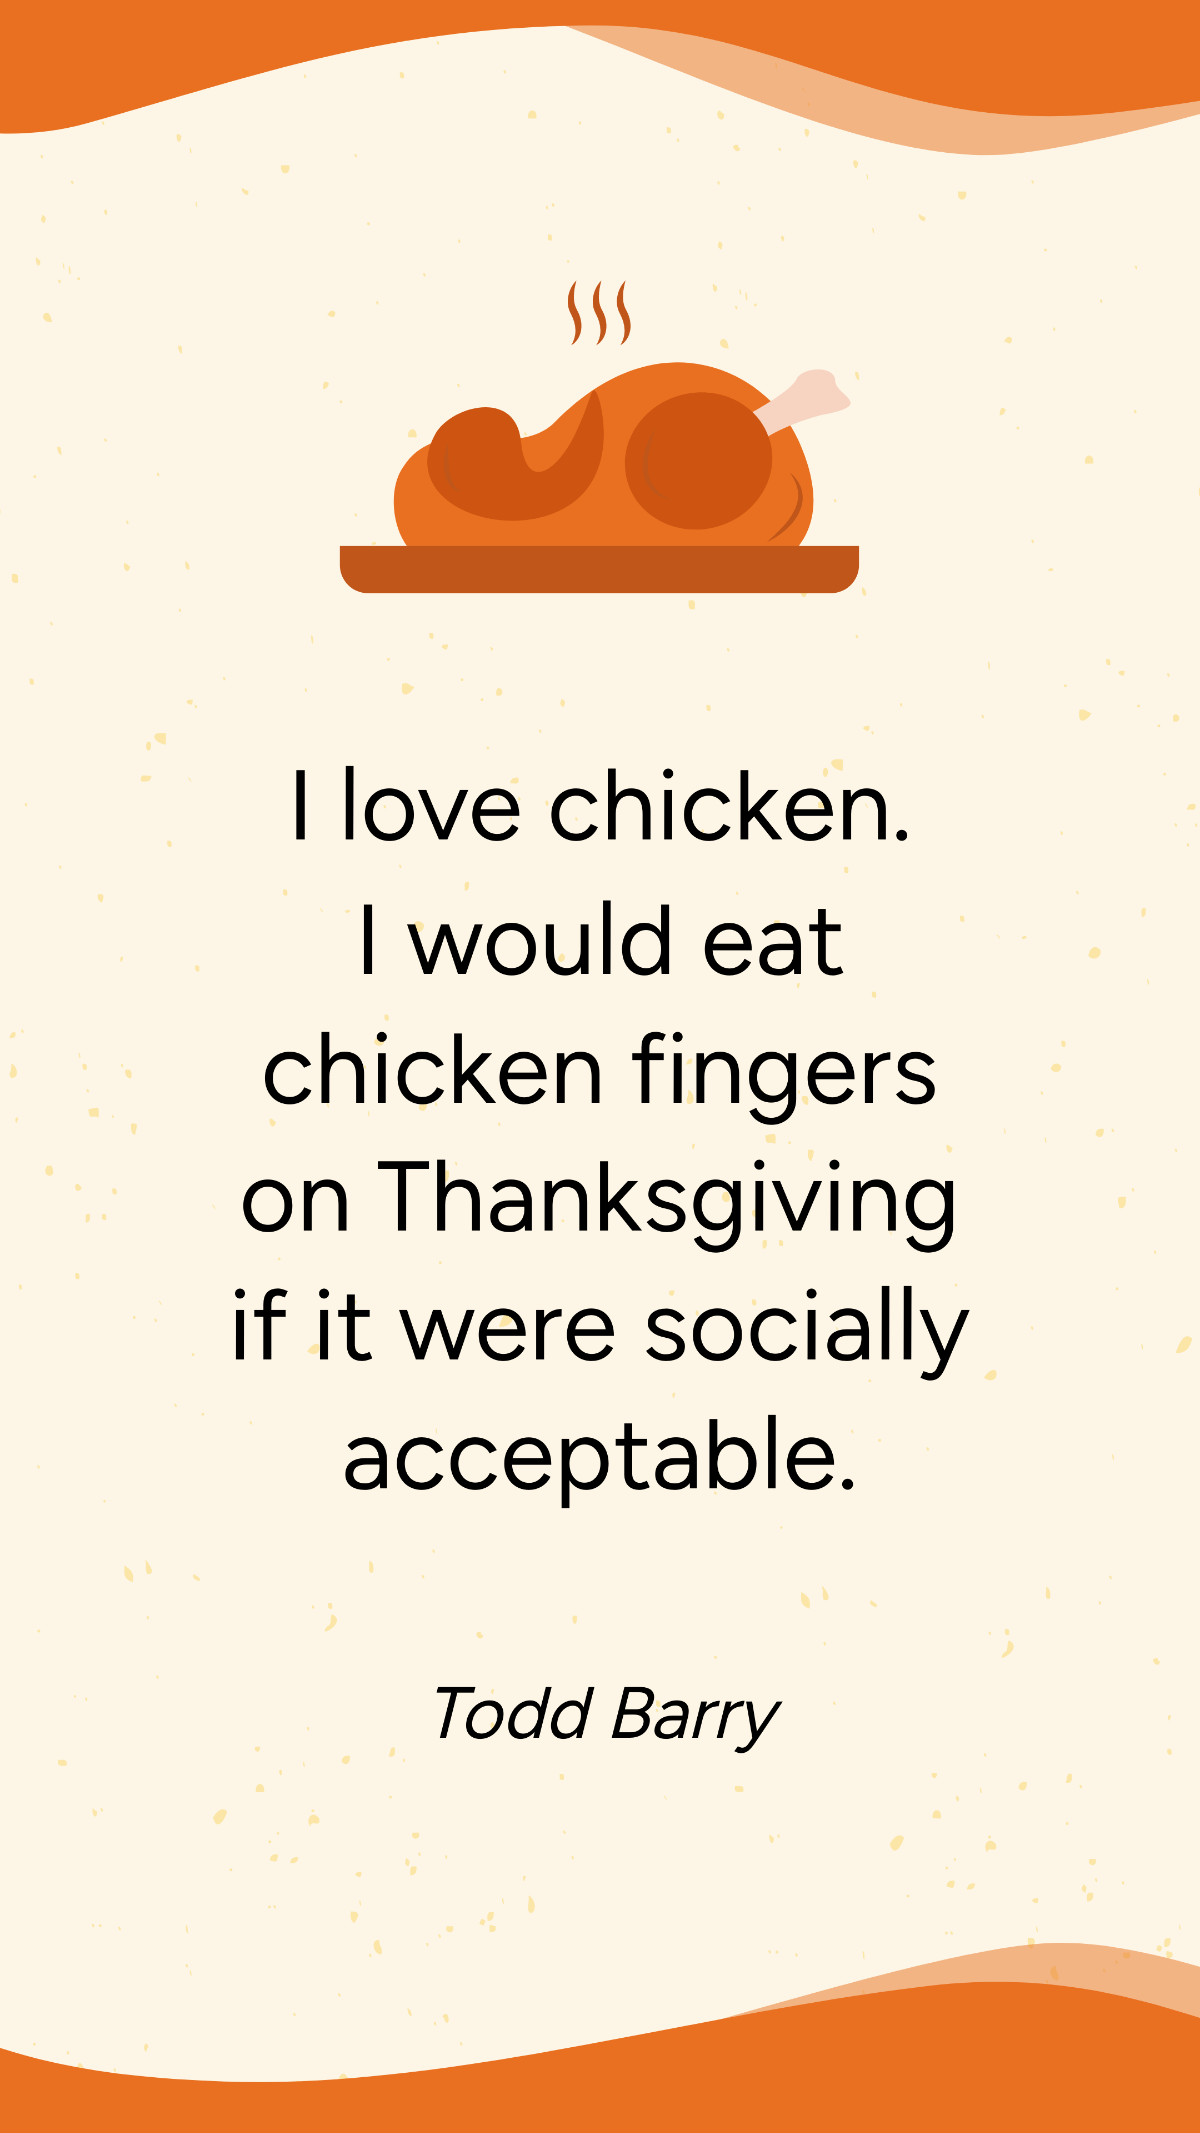 Todd Barry - I love chicken. I would eat chicken fingers on Thanksgiving if it were socially acceptable. Template